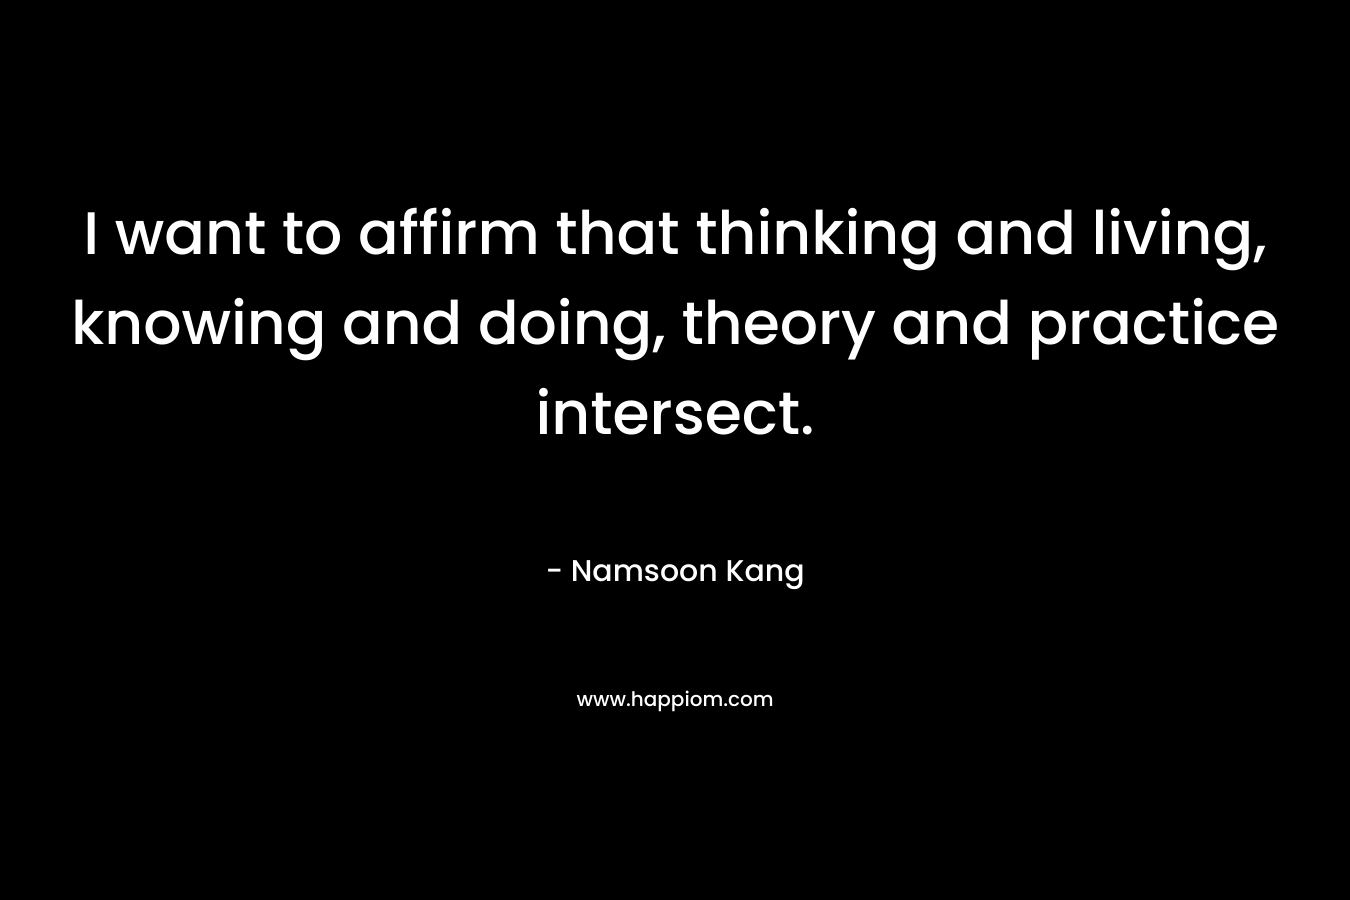 I want to affirm that thinking and living, knowing and doing, theory and practice intersect. – Namsoon Kang